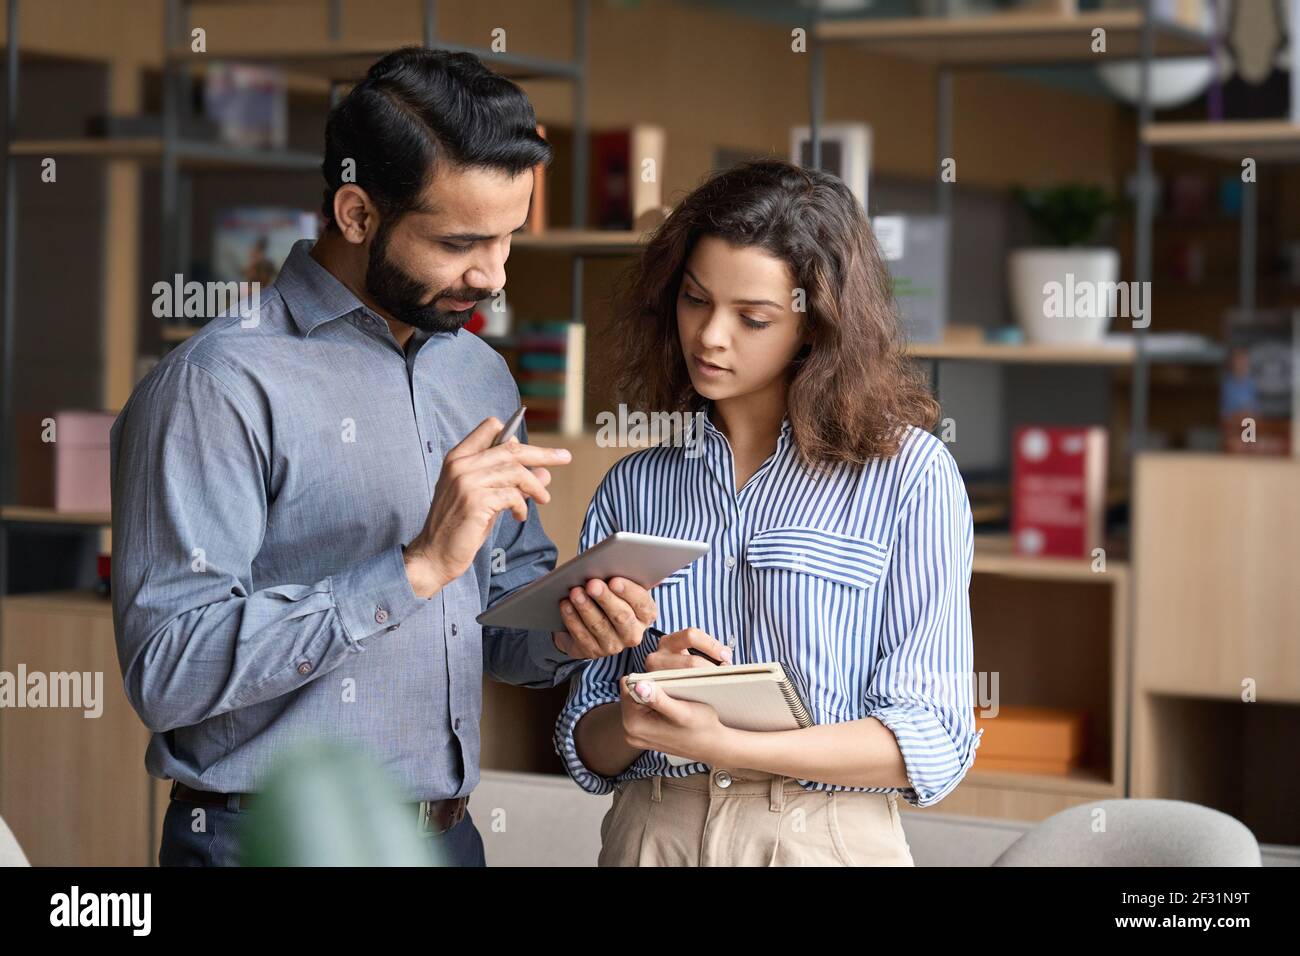 Indian manager holding digital tablet having discussion with latin employee. Stock Photo